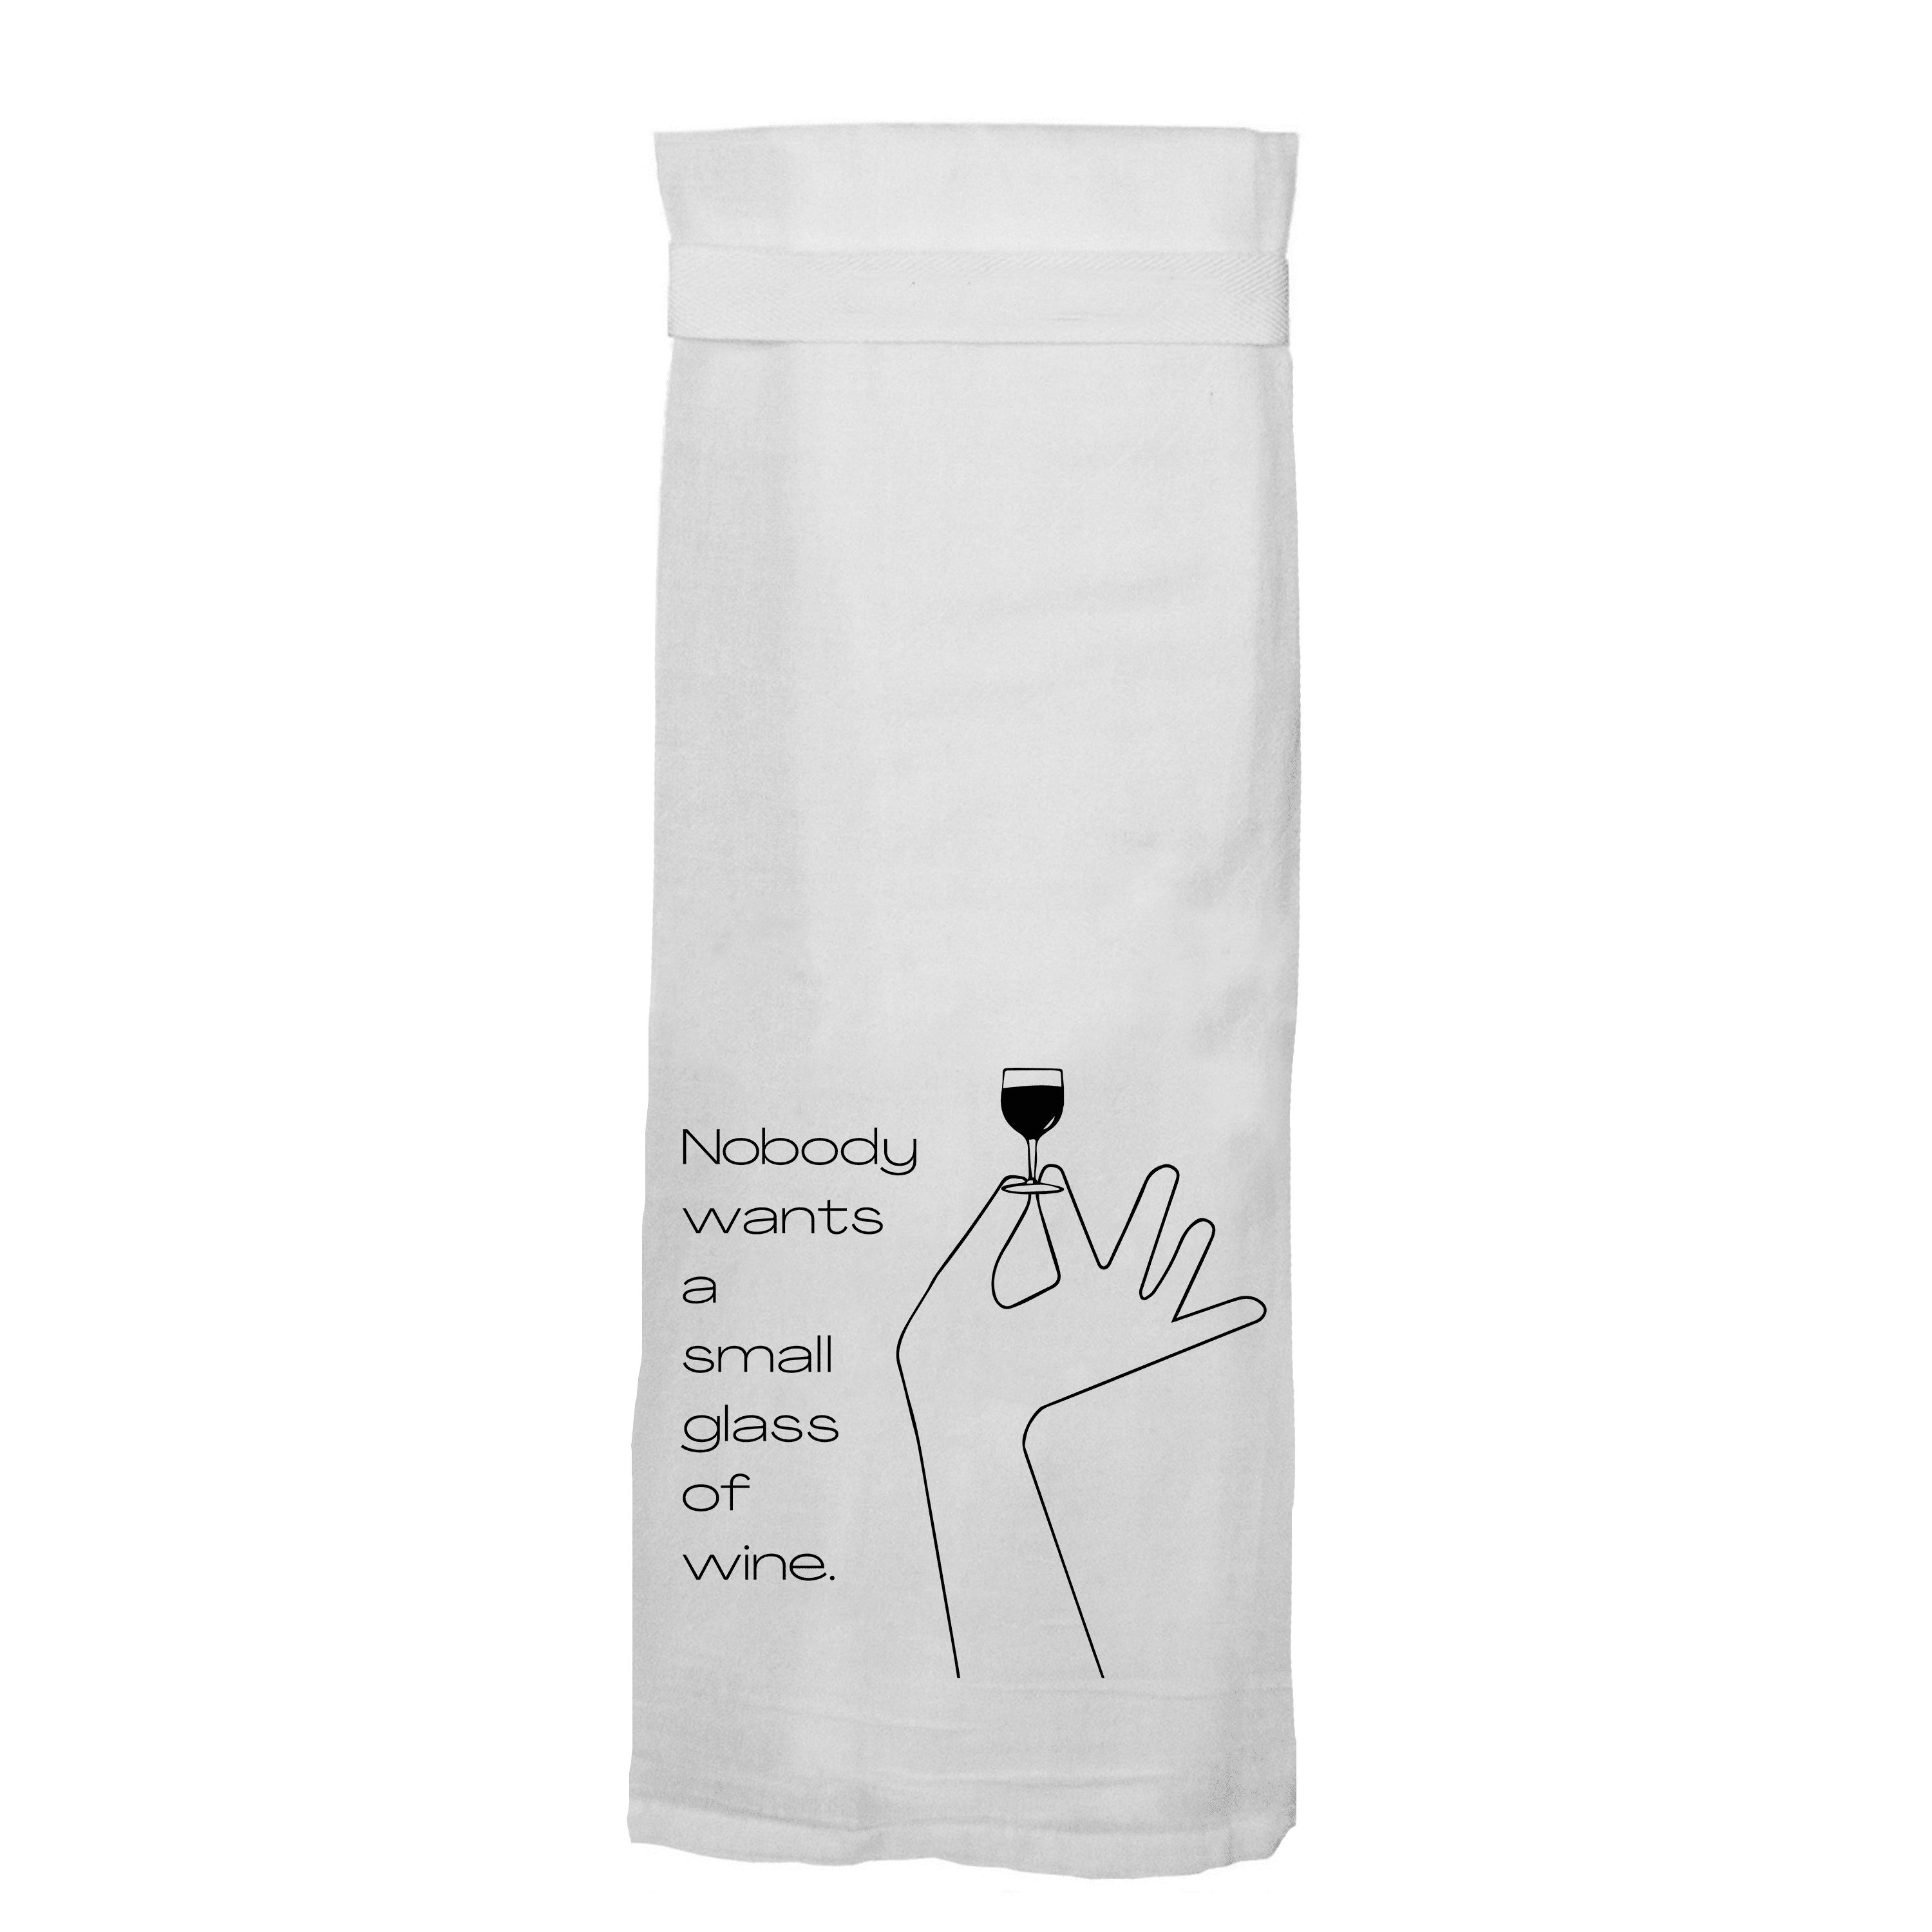 Funny Kitchen Towels, Fun Dish Towels with Wine Alcohol Drink Theme, 5  Flour Sack Towels 